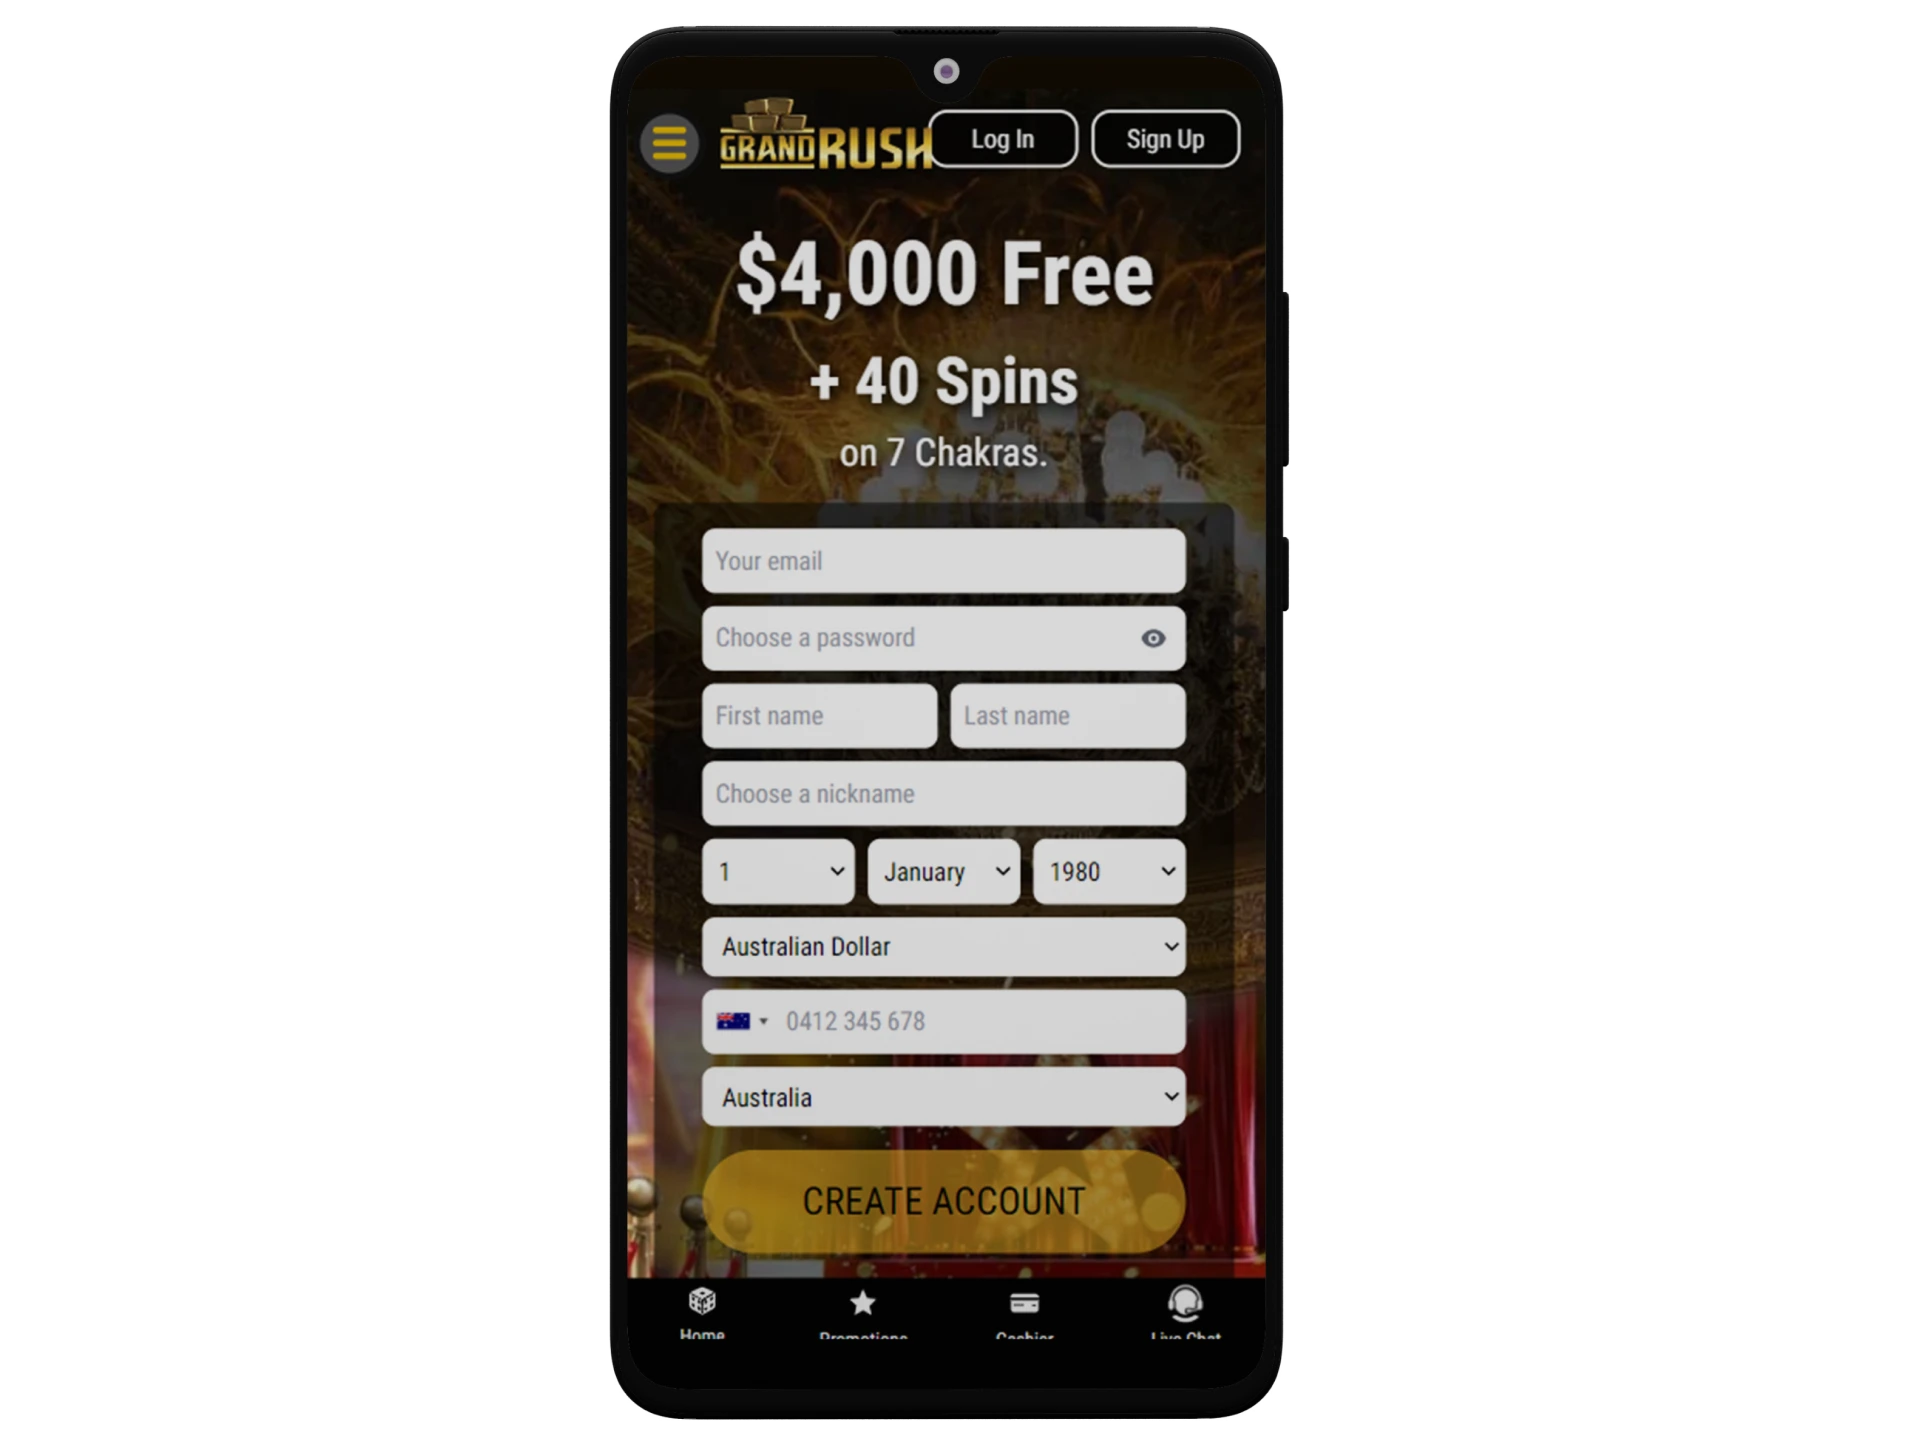 Visit the official Grand Rush Casino mobile website on any Android device.